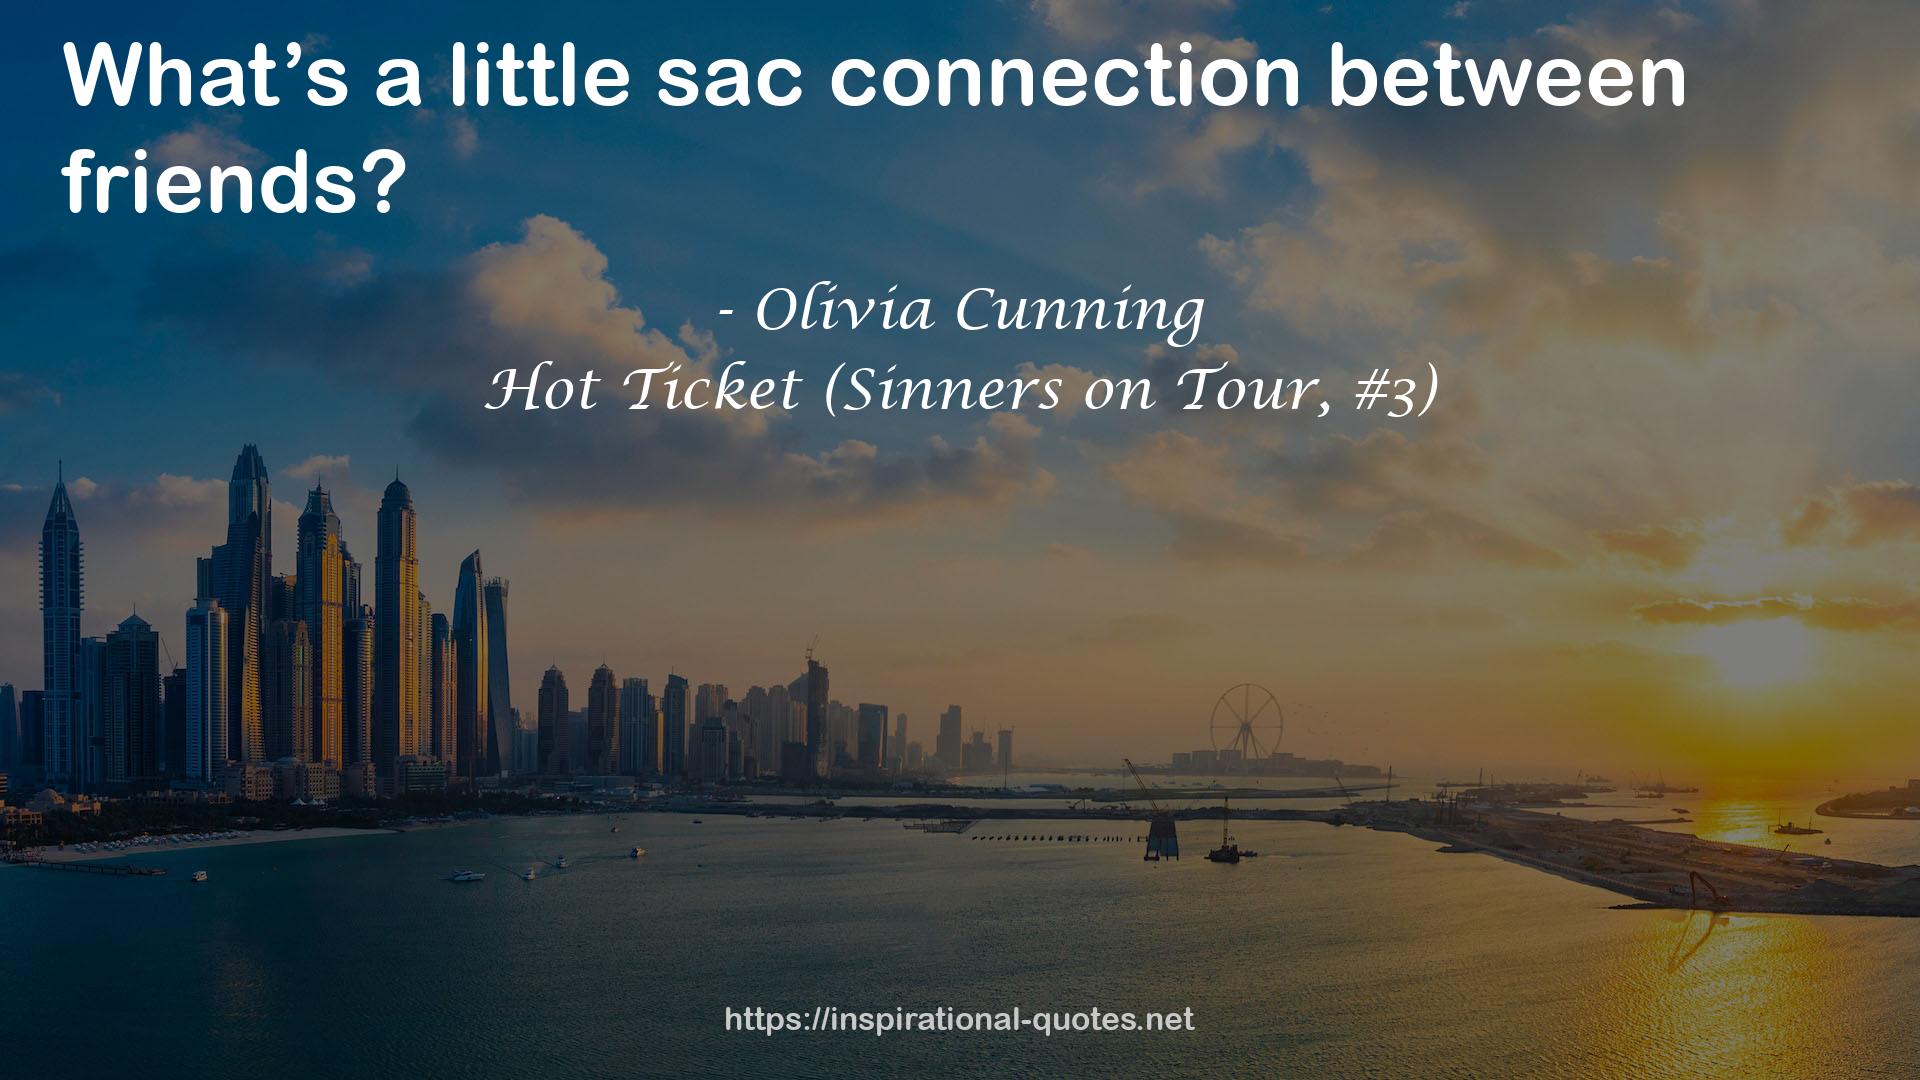 Hot Ticket (Sinners on Tour, #3) QUOTES